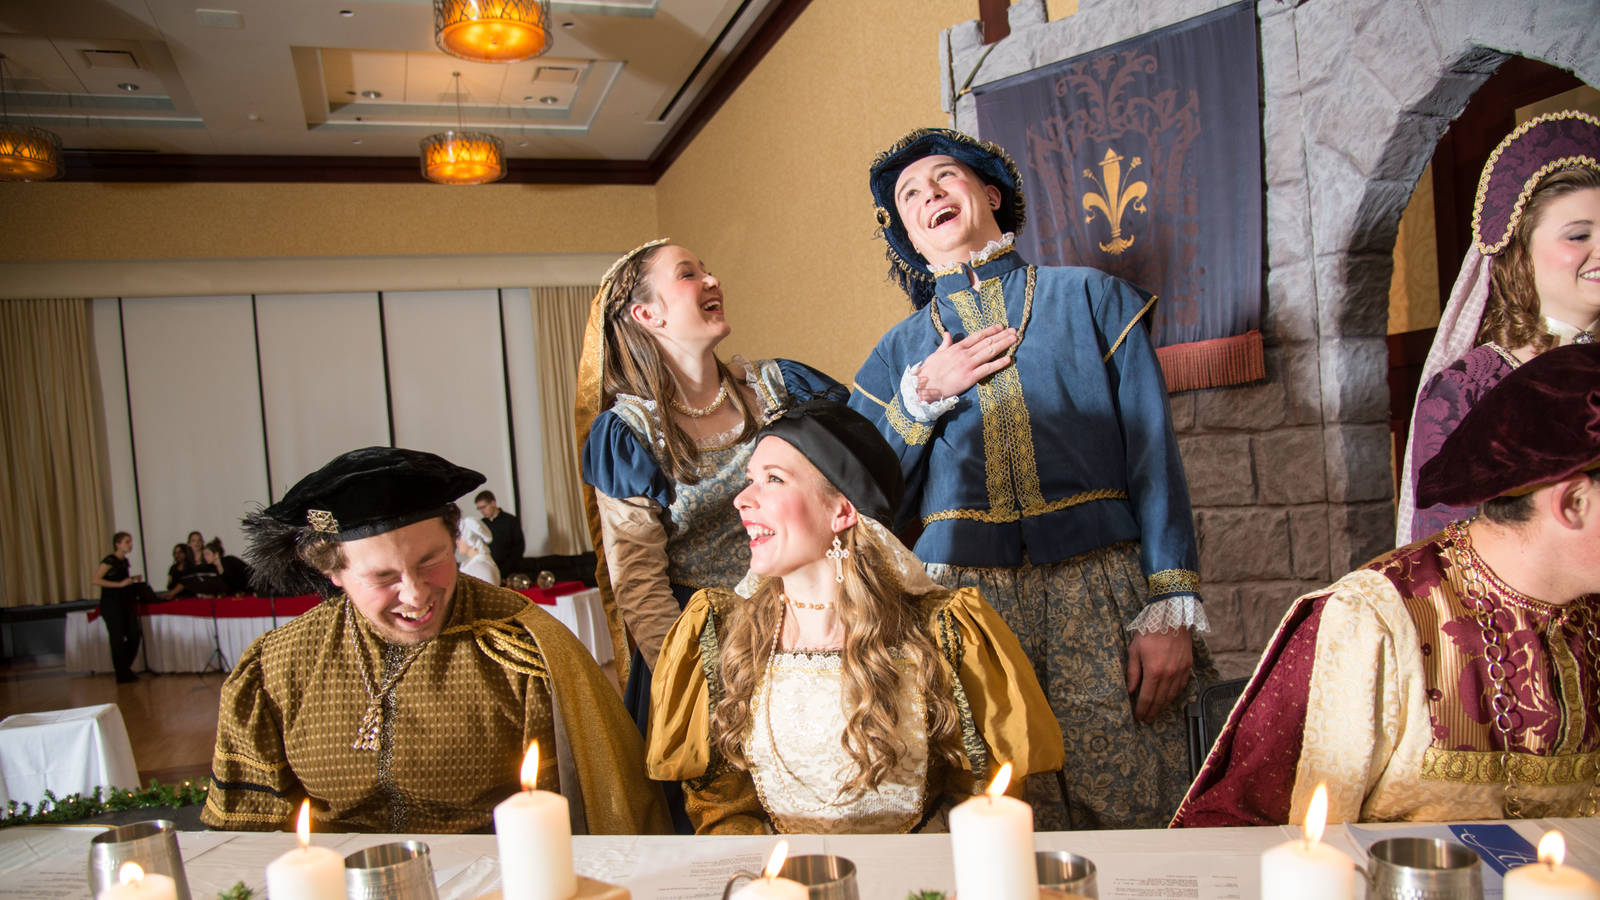 Members of the Ye Olde Madrigal Dinner laughing and talking.